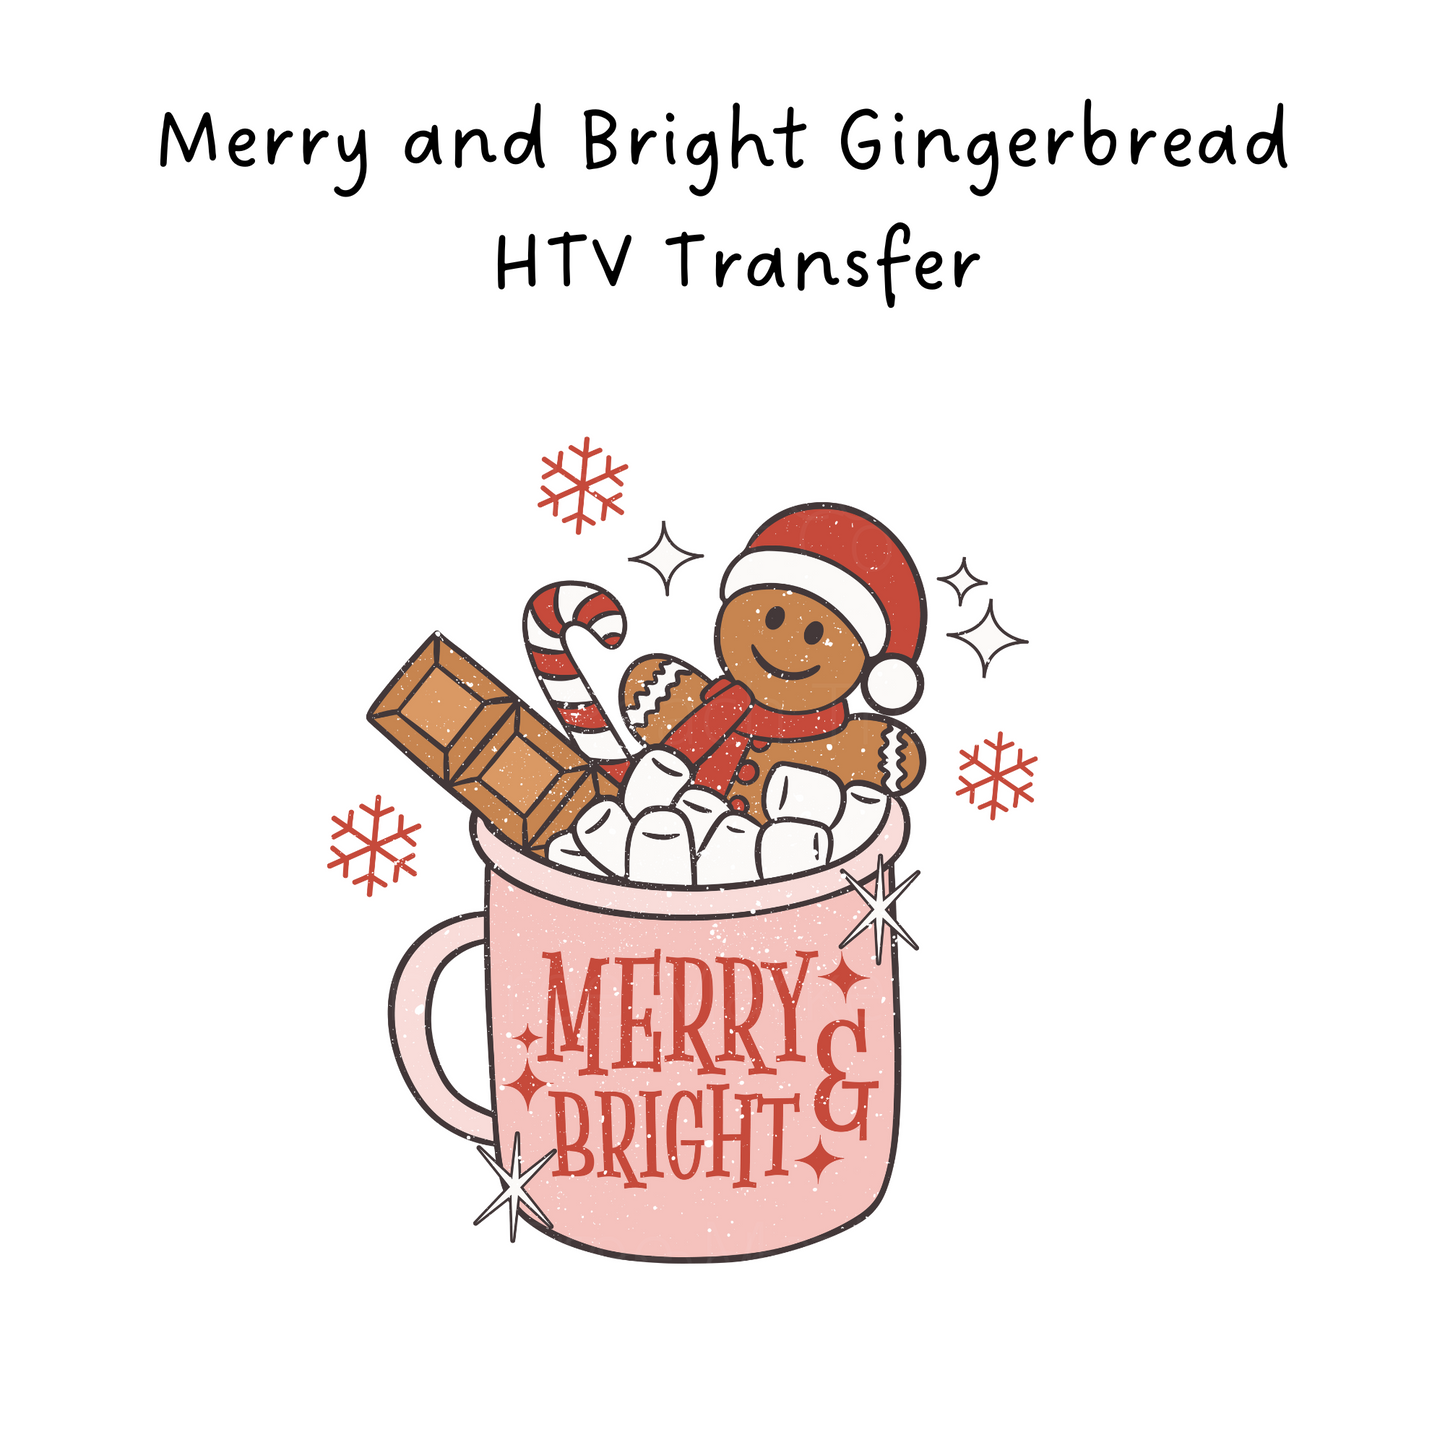 Merry And Bright Gingerbread HTV Transfer